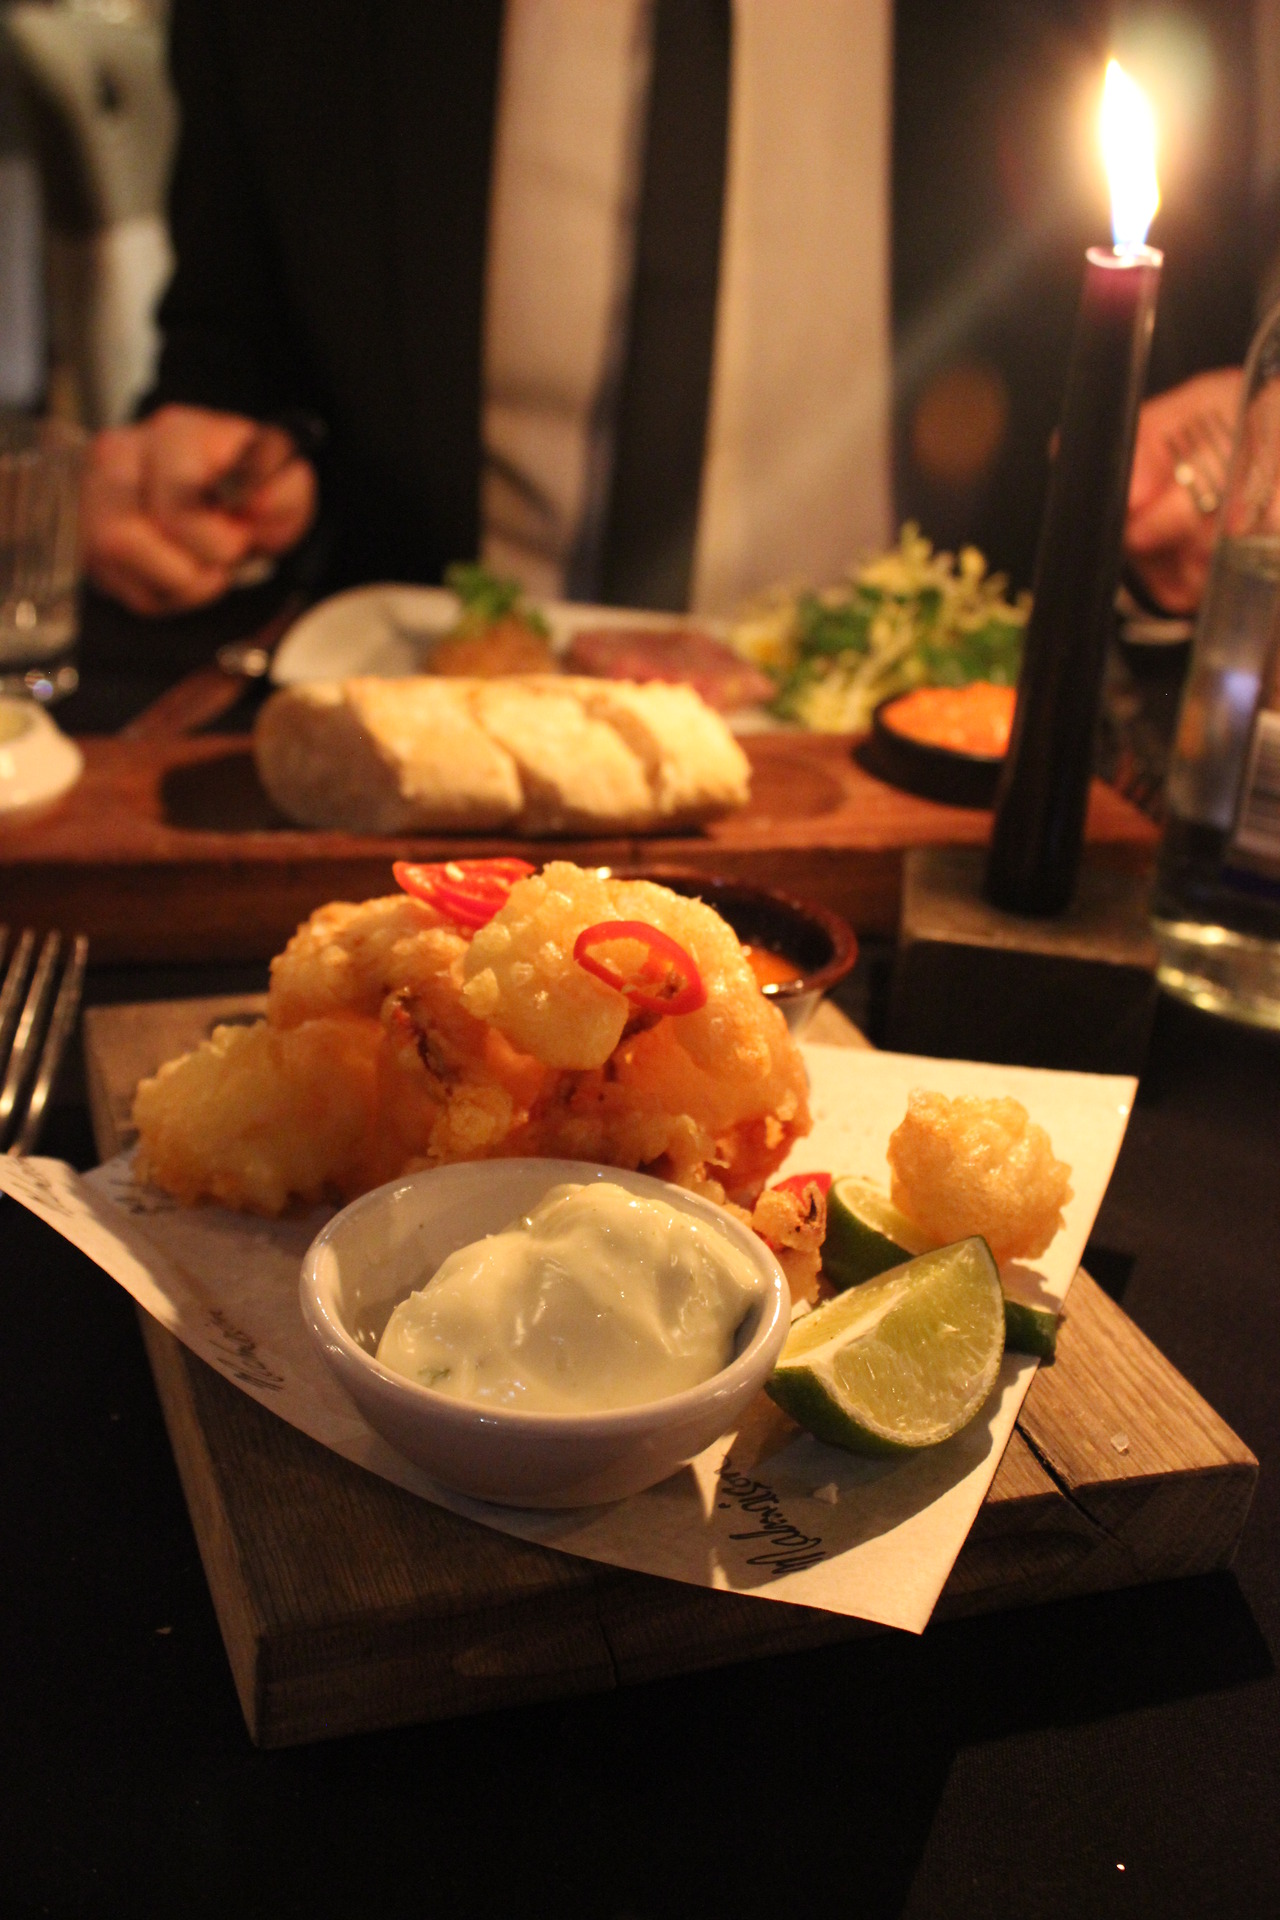 manchester malmaison food review, uk food and drink blog